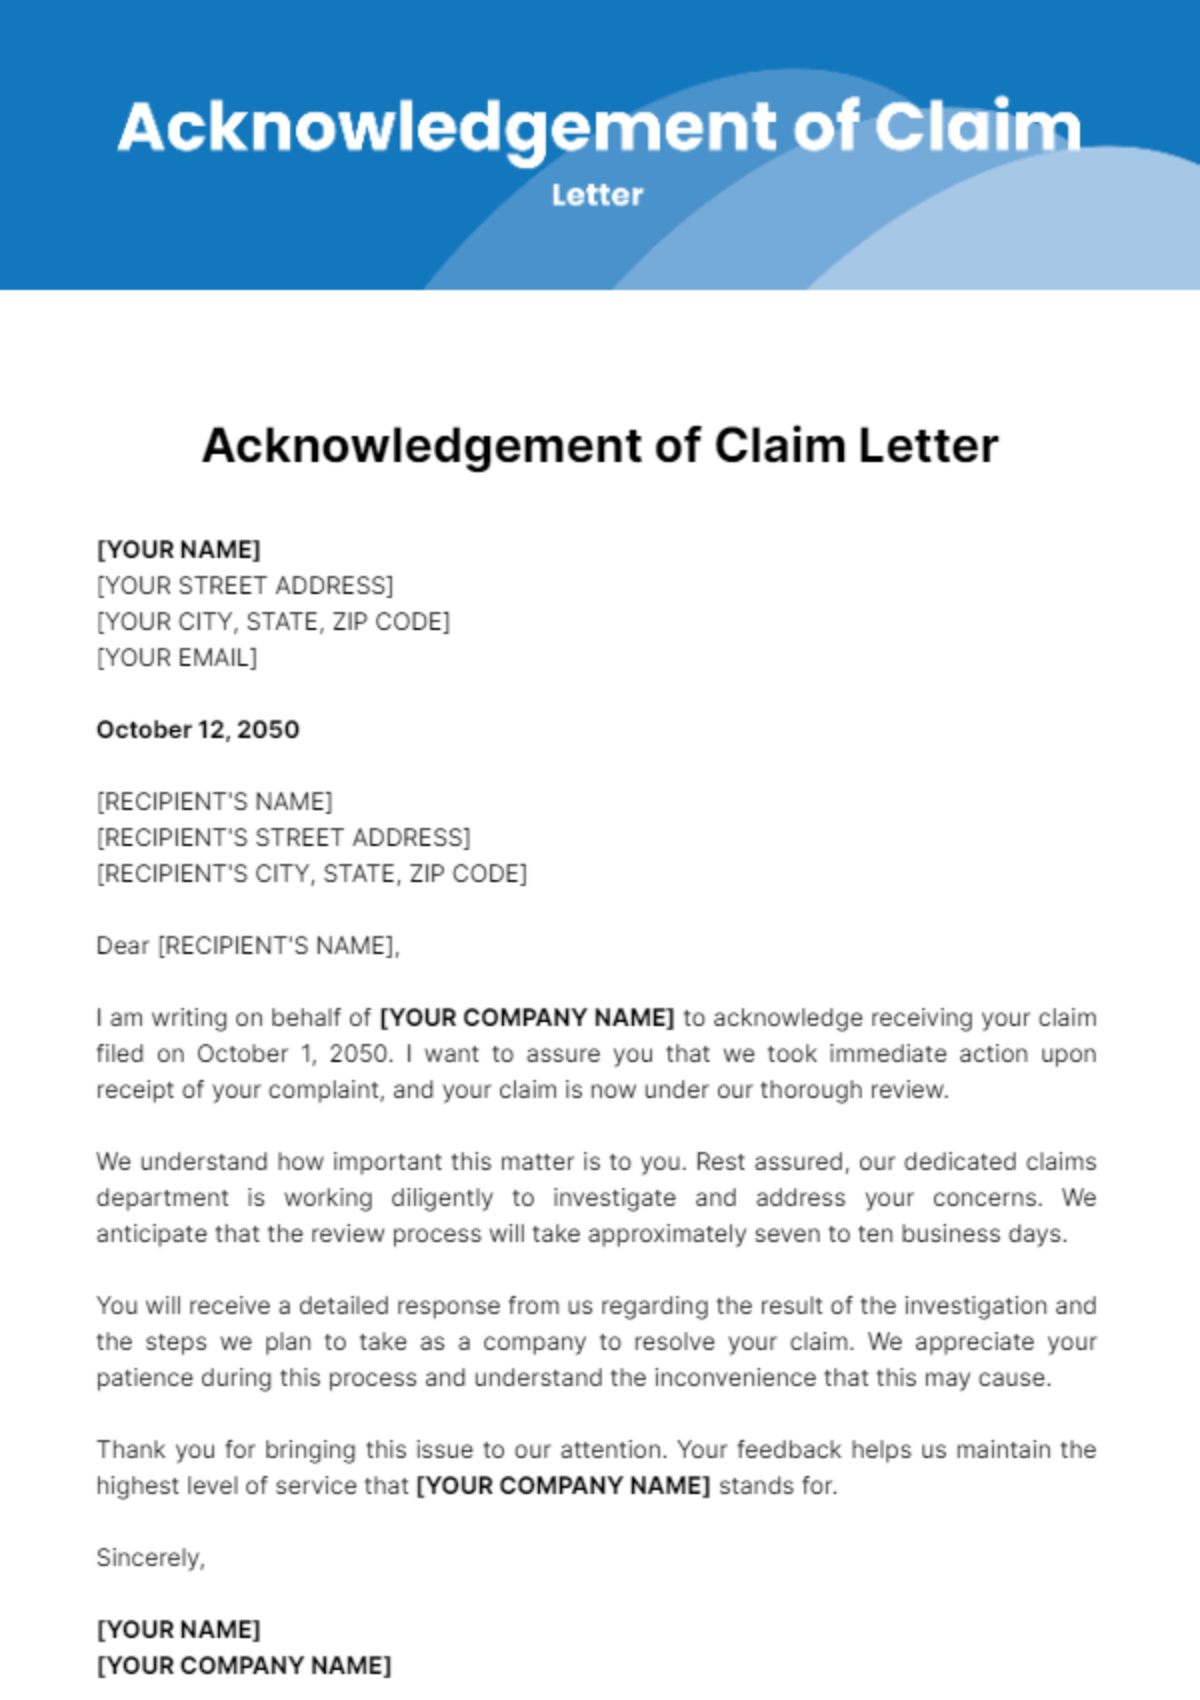 Acknowledgement of Claim Letter Template